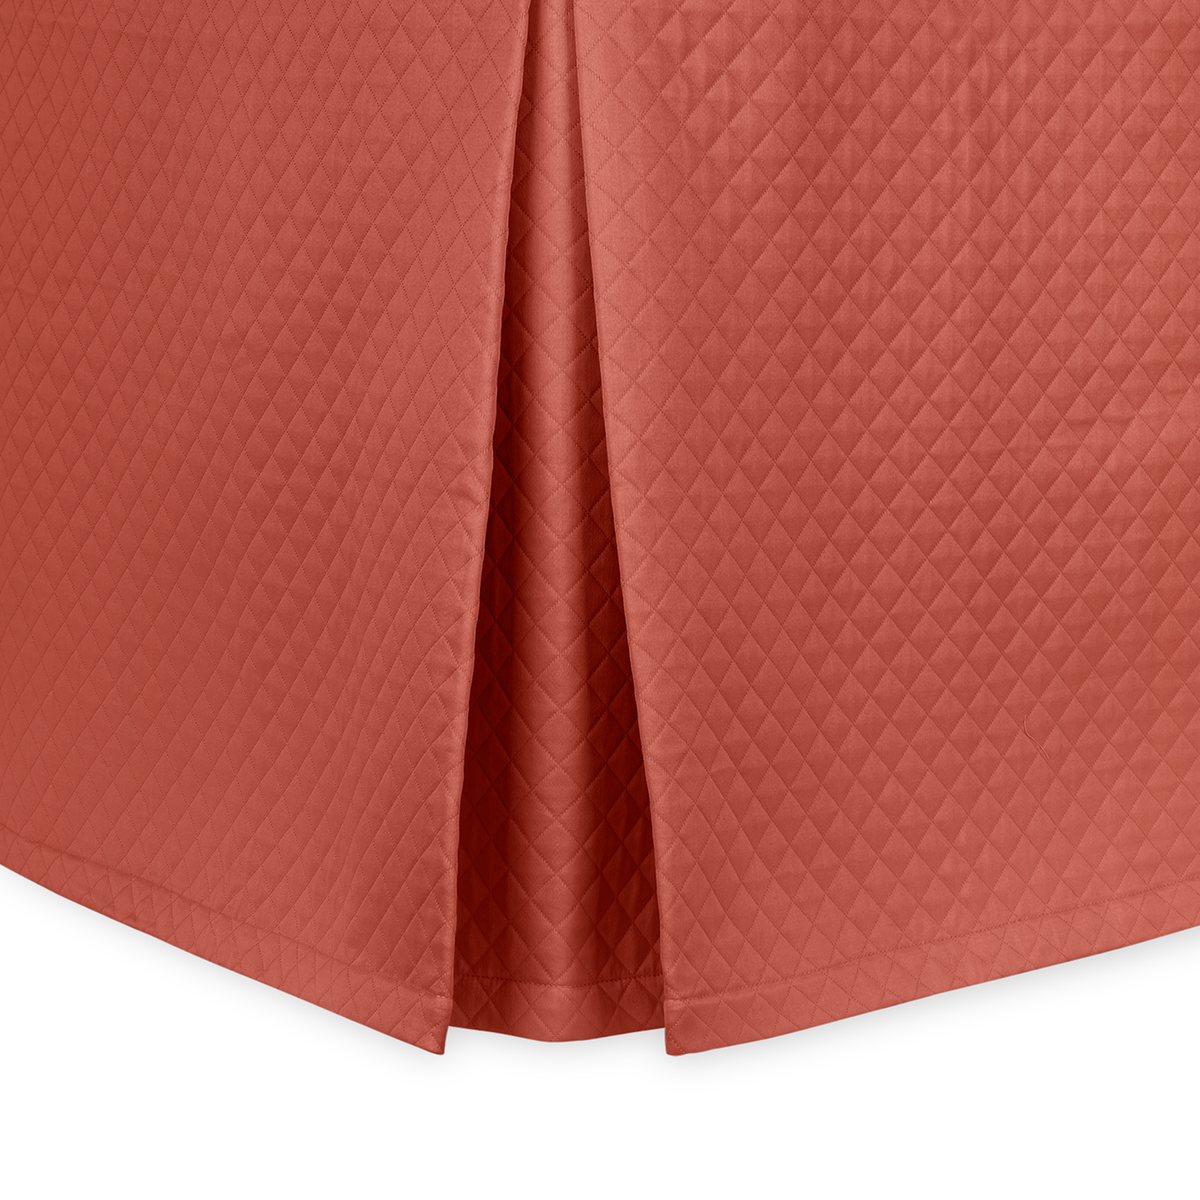 Silo Image of Matouk Petra Bed Skirt in Color Deep Coral